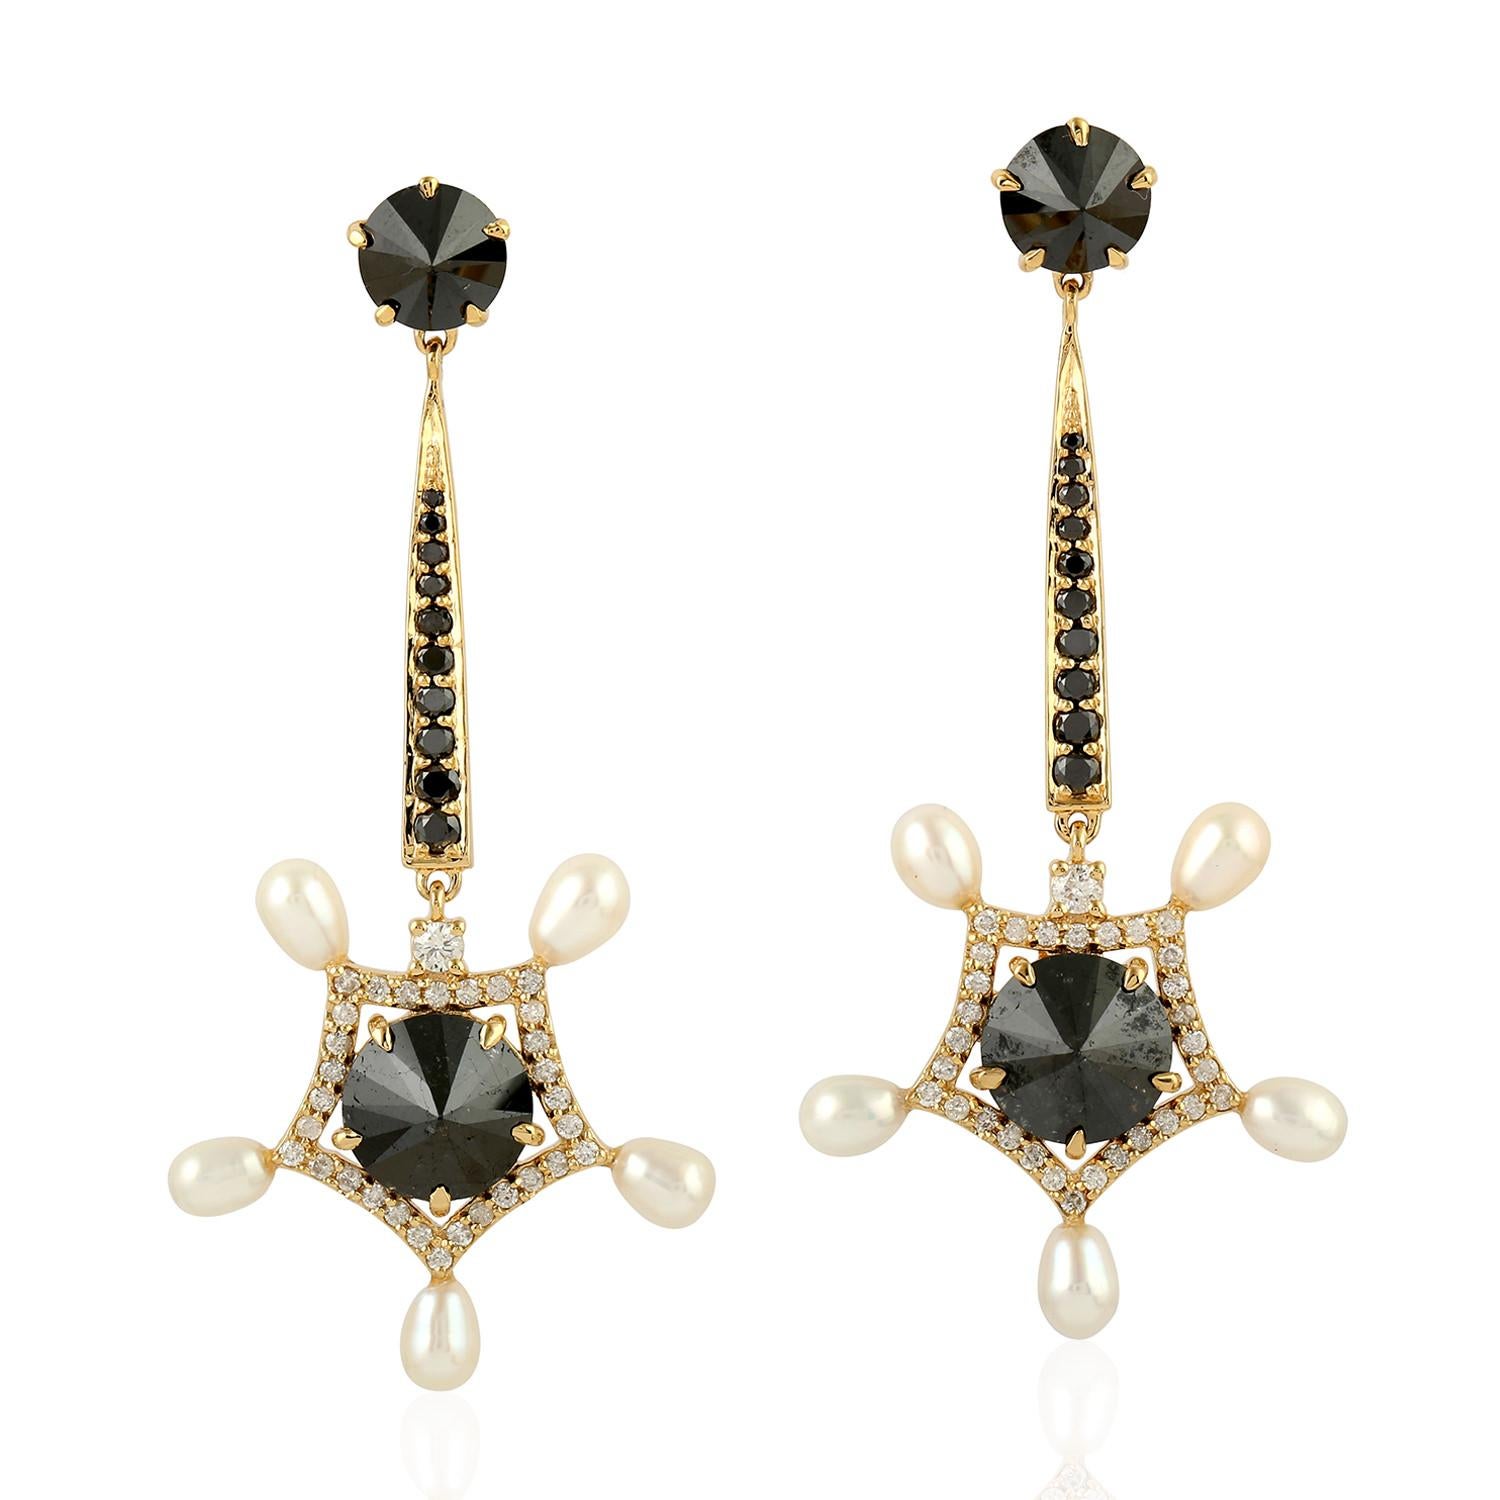 Modern Black and White Dangle Drop Earring Set in 18k Yellow Gold